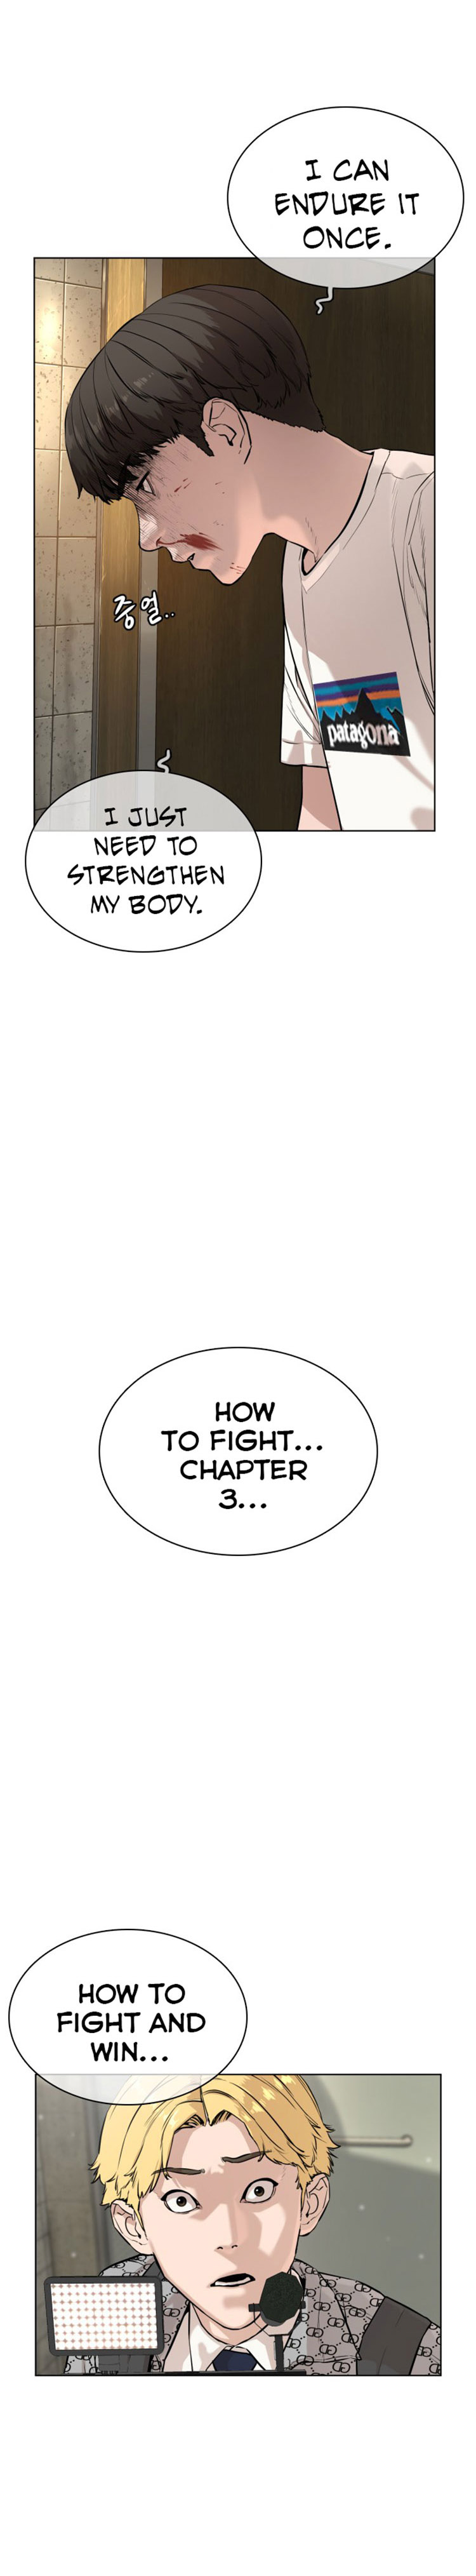 How to Fight Ch. 18 This time It's Perfect!